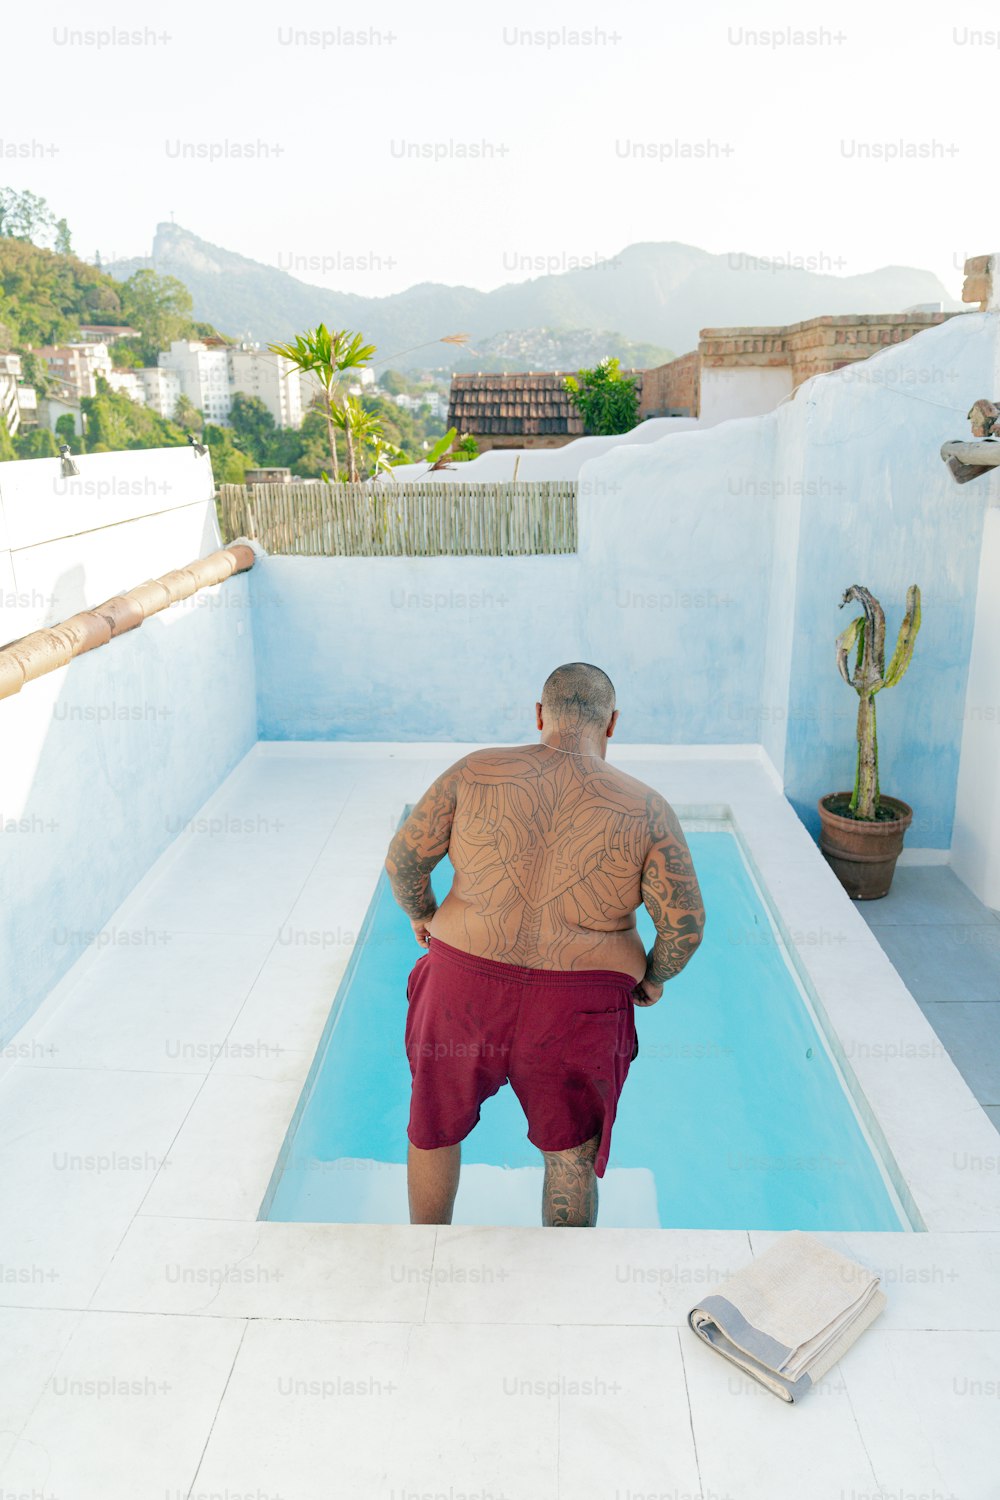 a man standing in a pool of water